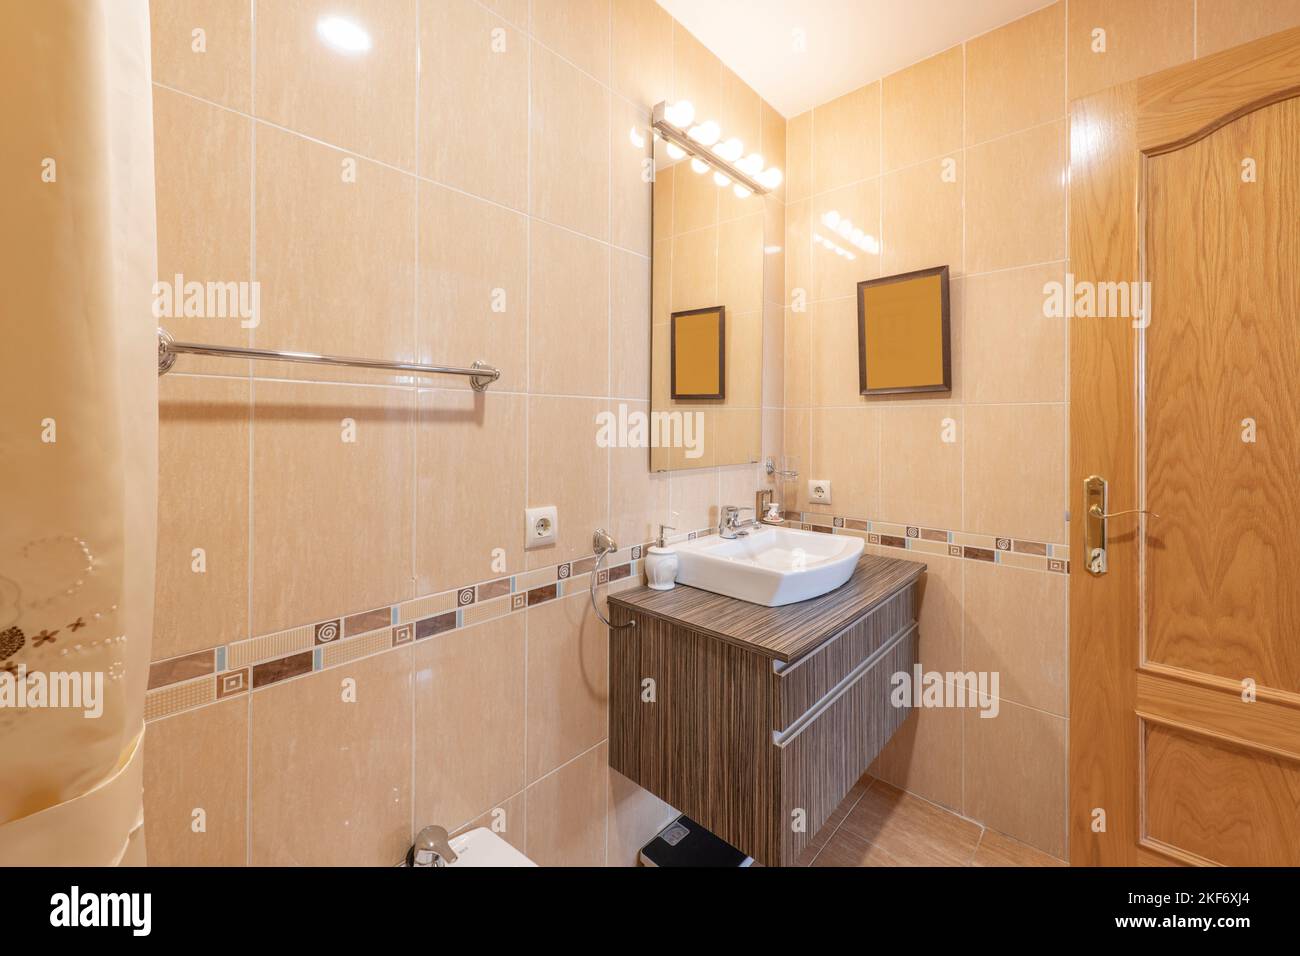 Bathroom with wooden wall cabinet with a frameless mirror above it Stock Photo